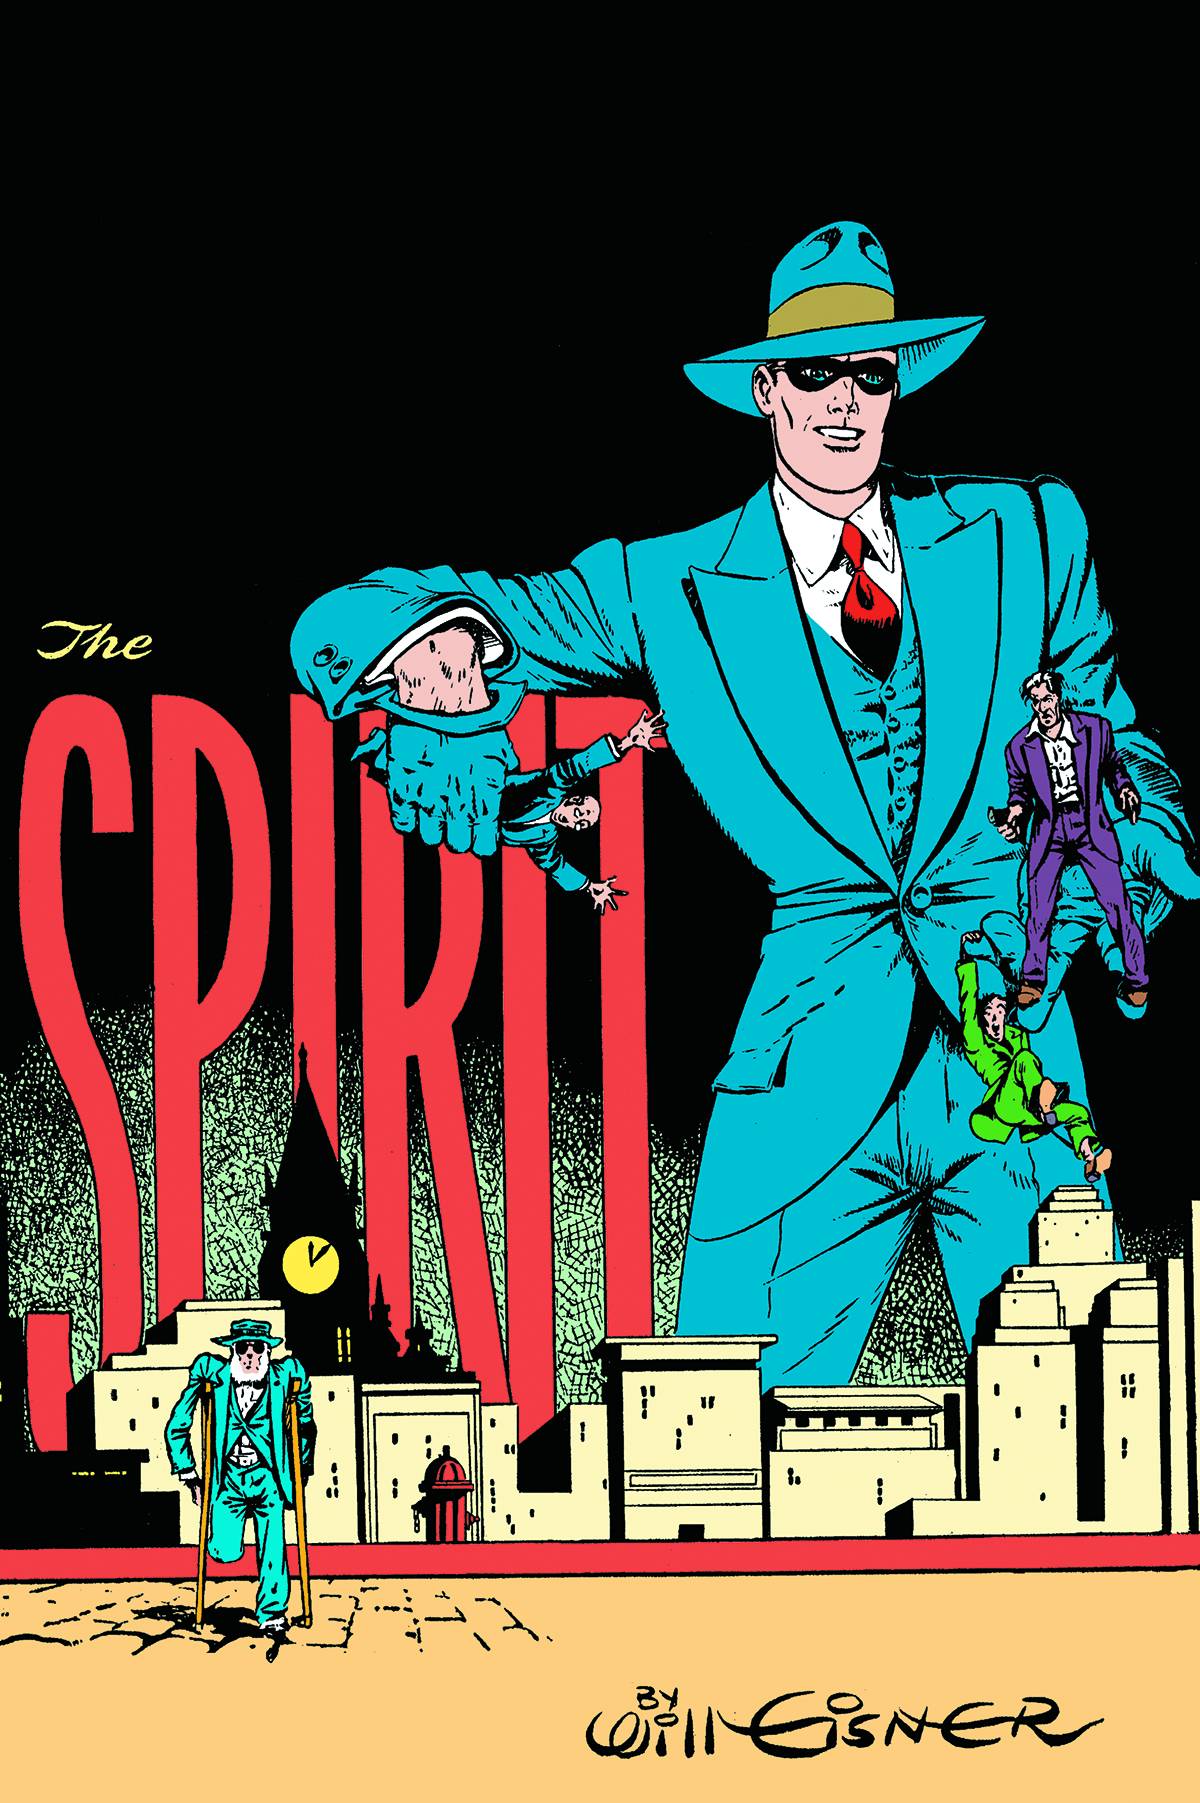 Will Eisners The Spirit A Celebration of 75 Years Hardcover